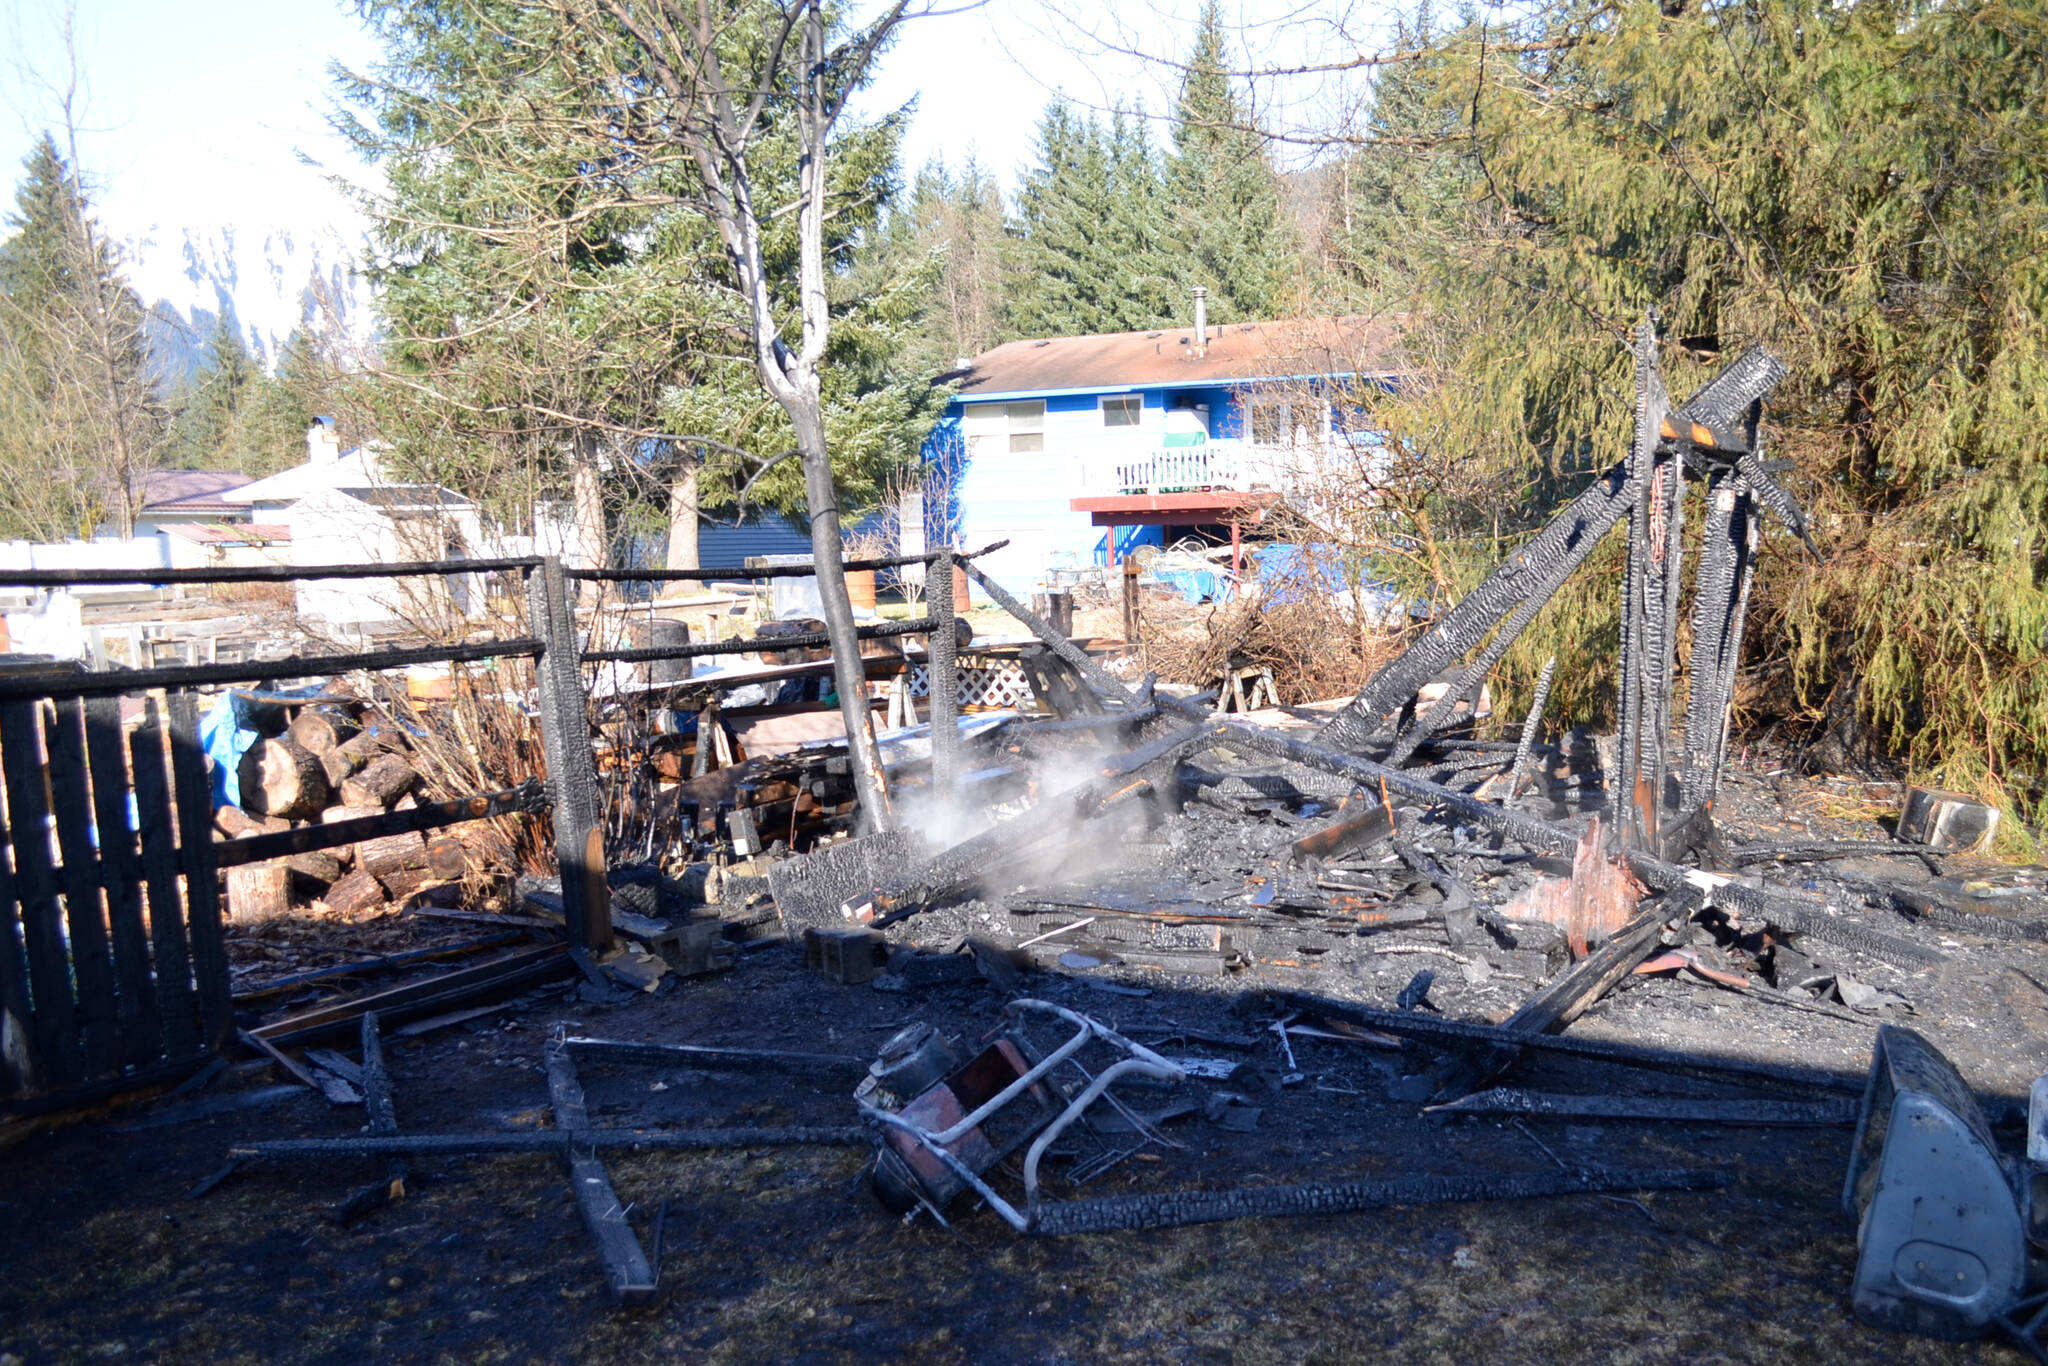 A child playing with lighter fluid started a fire in a backyard shed on Tuesday that completely consumed the structure. (Courtesy photo / Capital City Fire/Rescue)